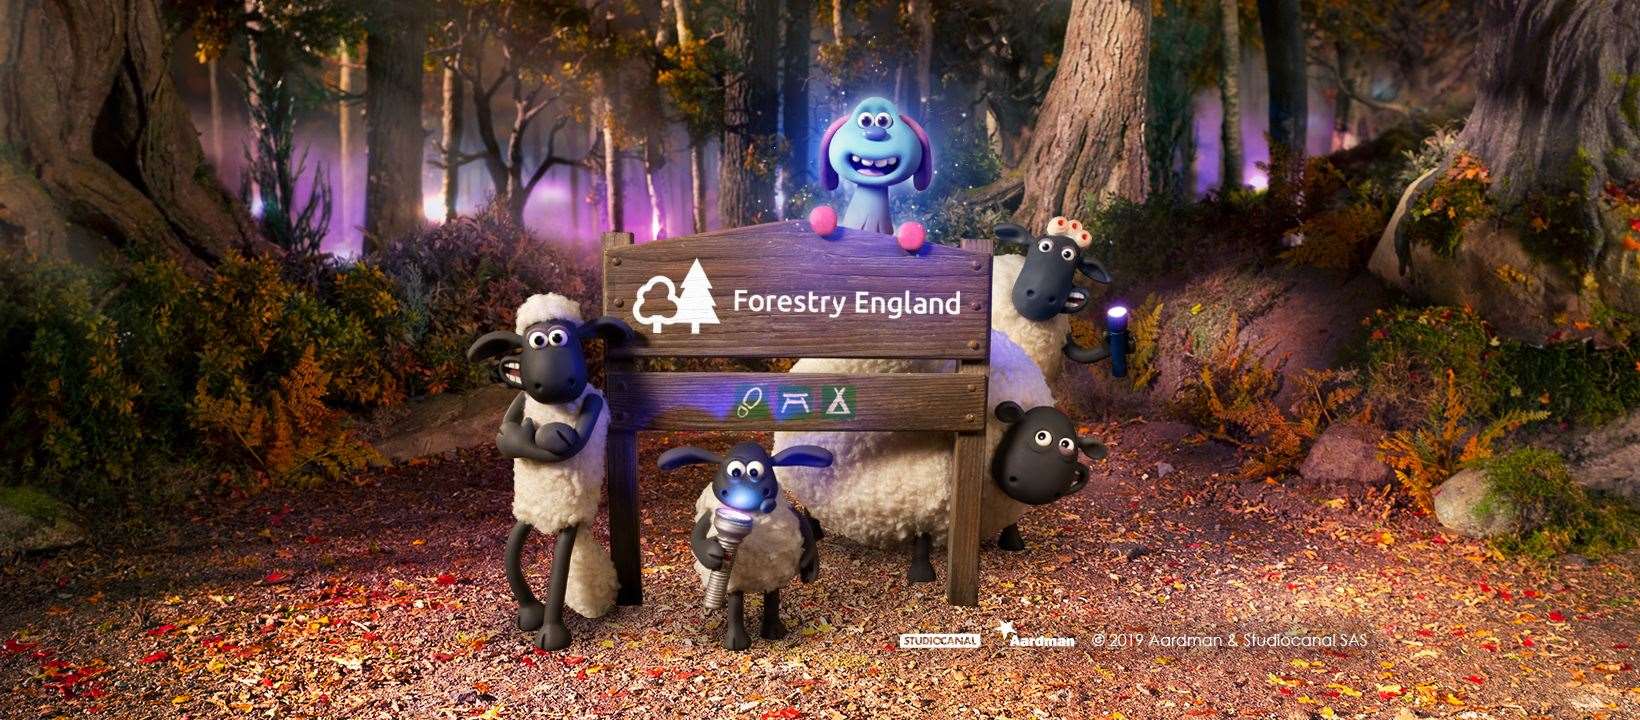 There are lots of Shaun the Sheep Farmageddon inspired activities in the county this half term